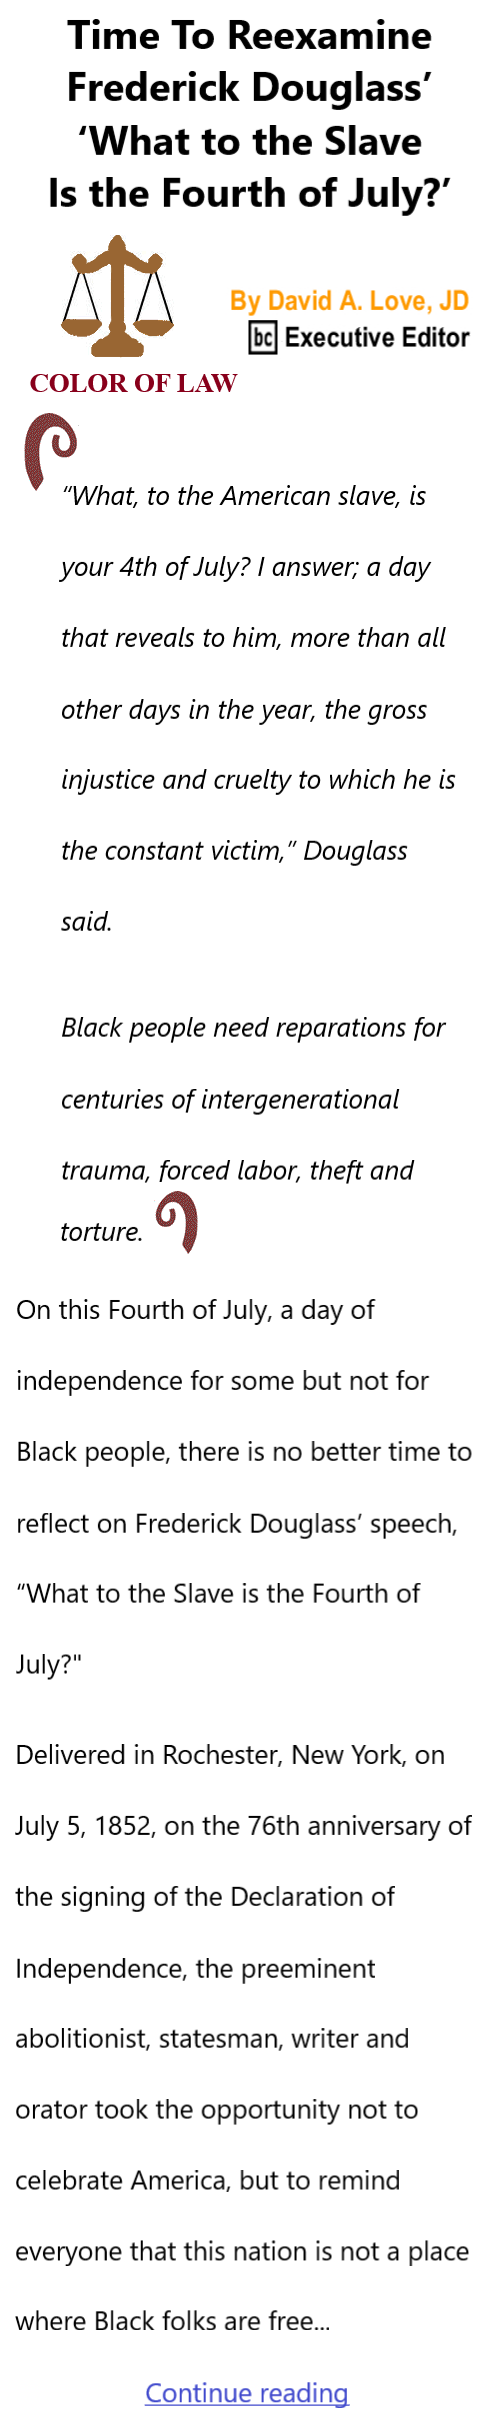 BlackCommentator.com June 29, 2023 - Issue 962: Time To Reexamine Frederick Douglass’ ‘What to the Slave Is the Fourth of July?’ - Color of Law By David A. Love, JD, BC Executive Editor